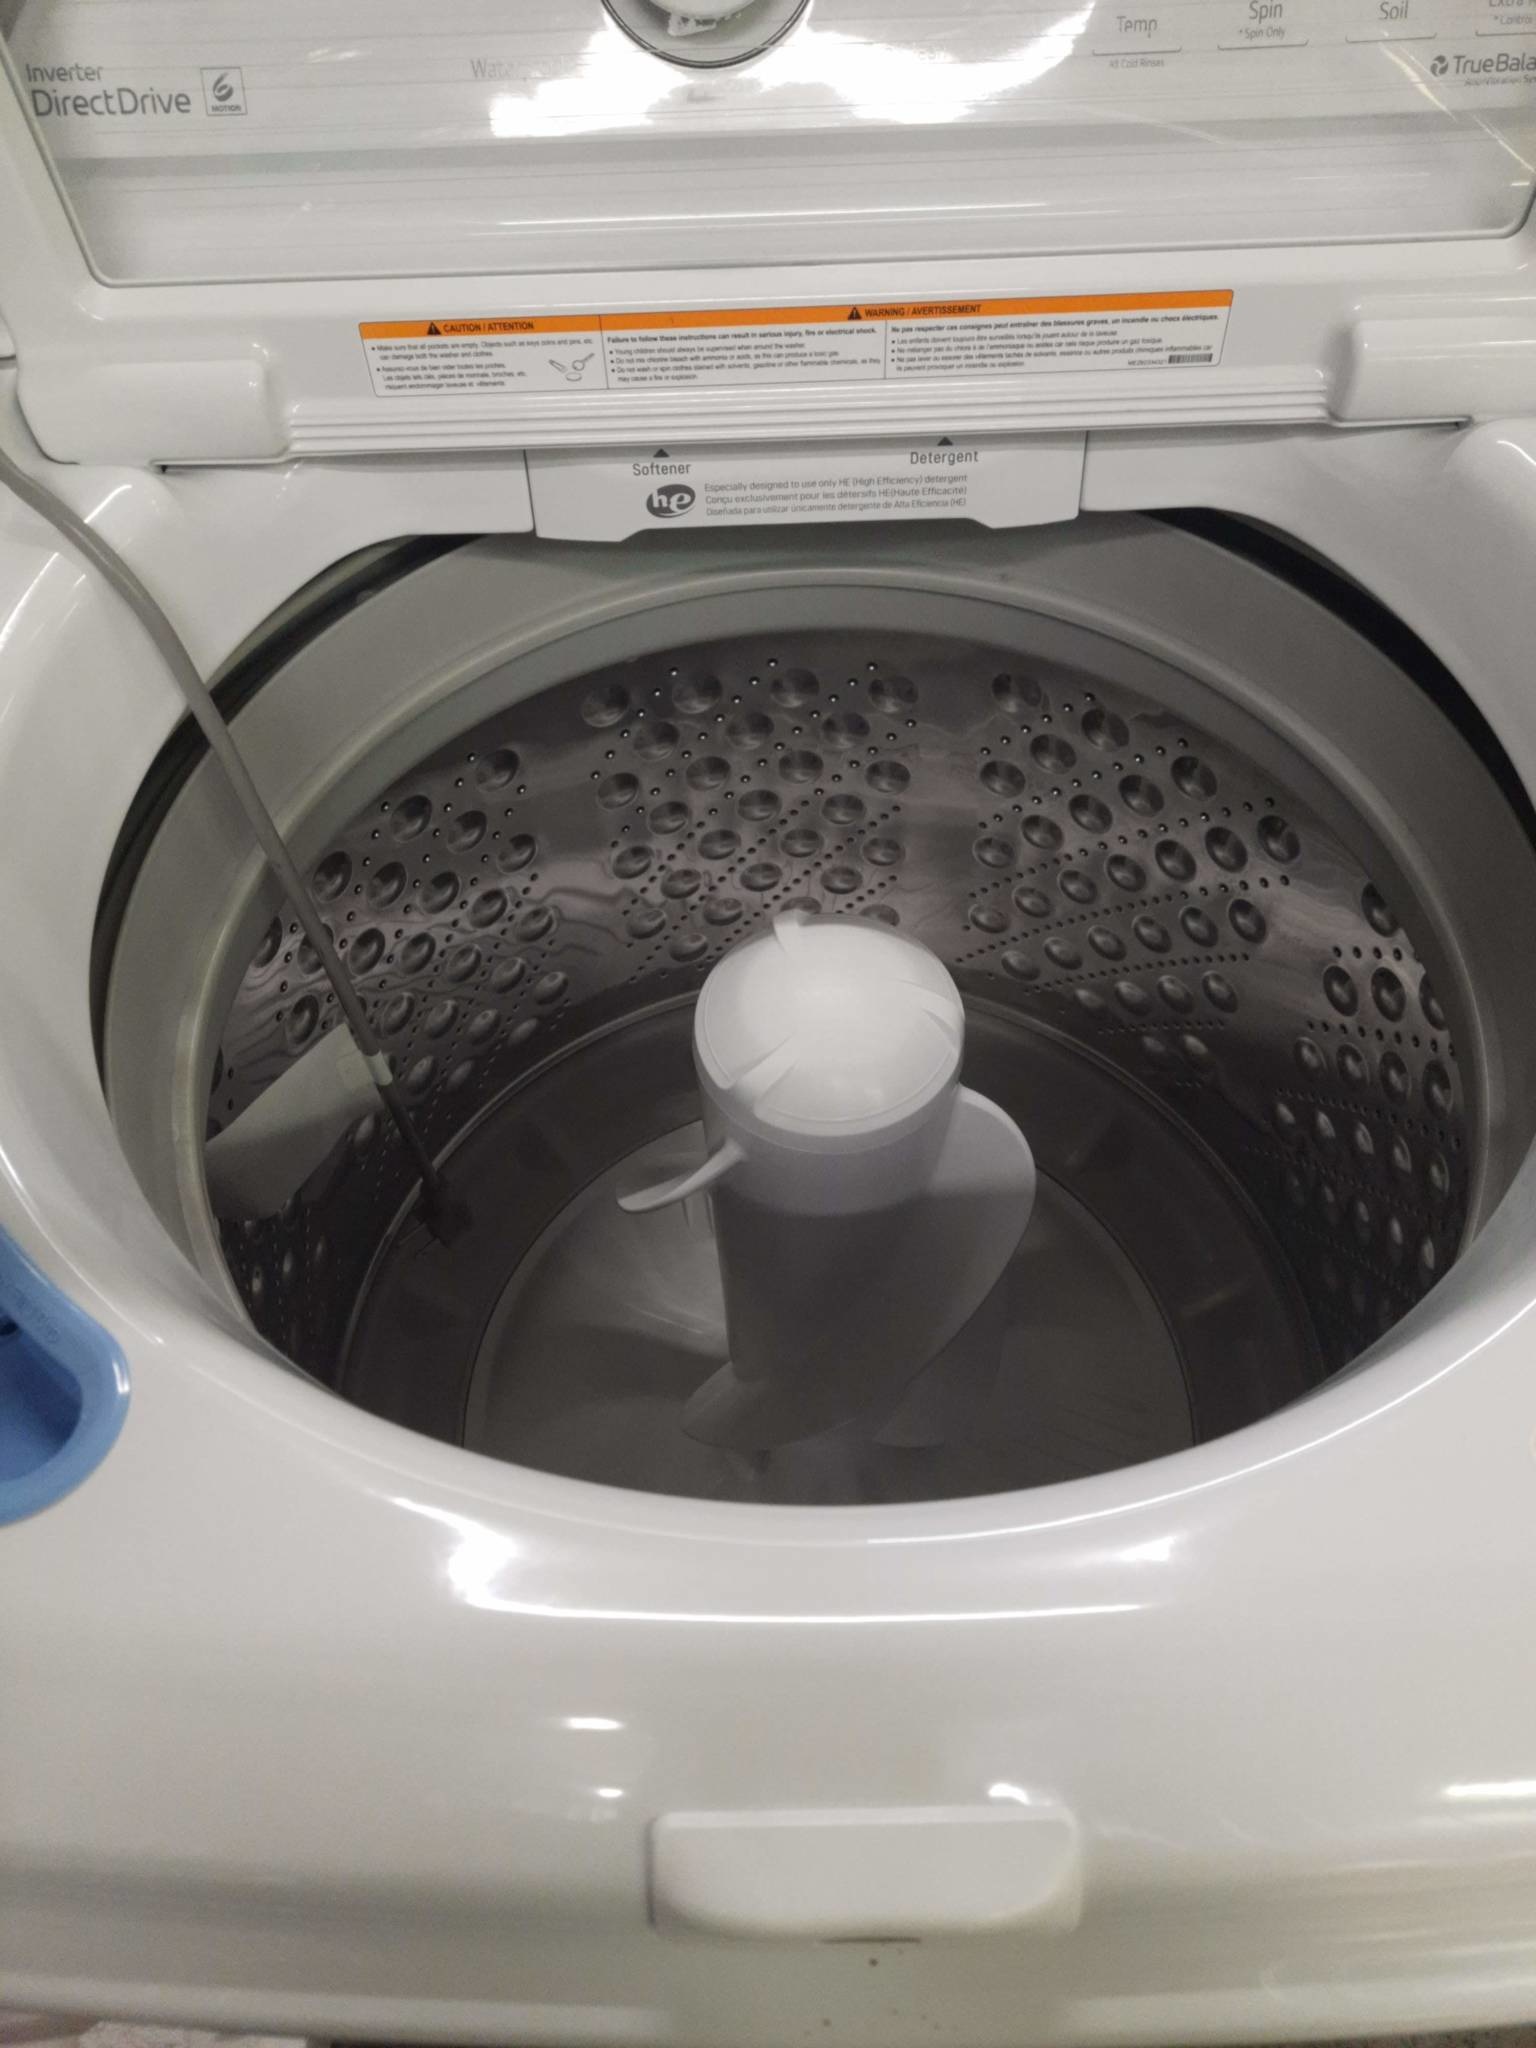 LG *LG  WT7005CW  4.3 cu. ft. Large Capacity Top Load Washer with 4-Way Agitator, NeveRust Drum, TurboDrum Technology in White